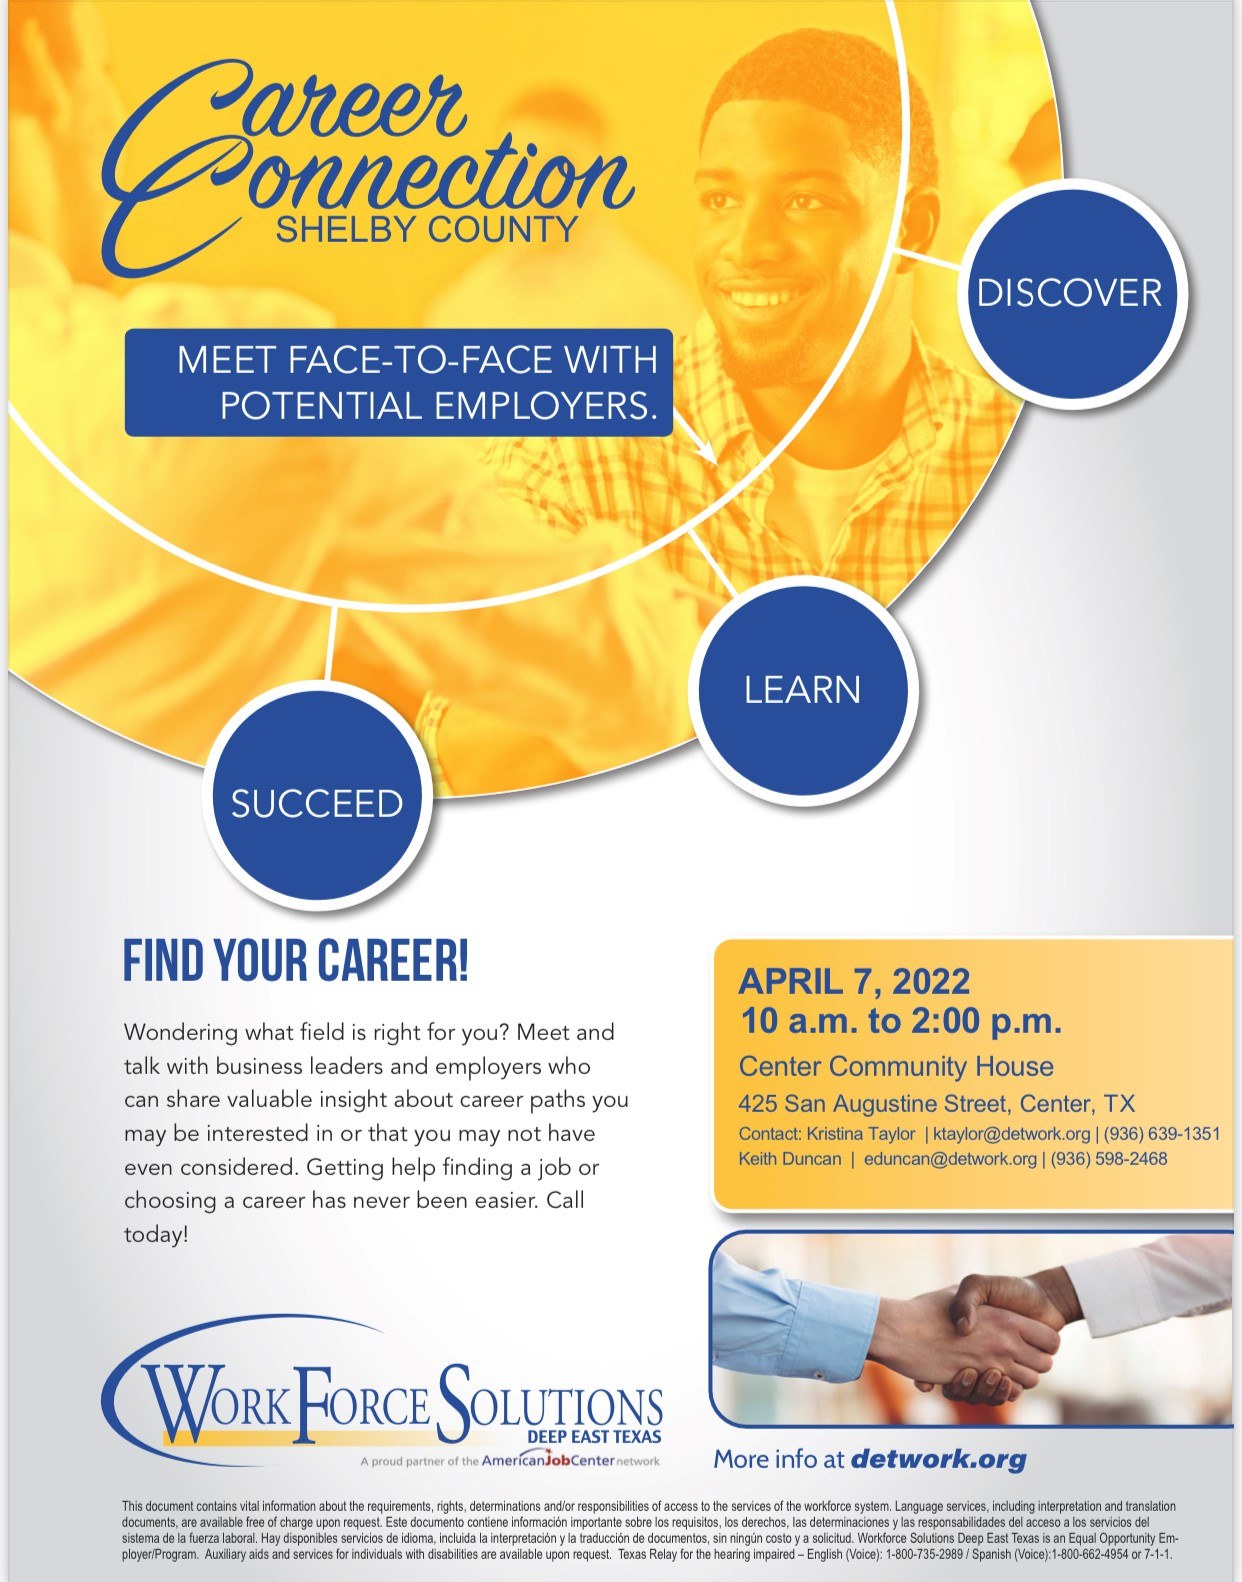 Career Connection in Shelby County